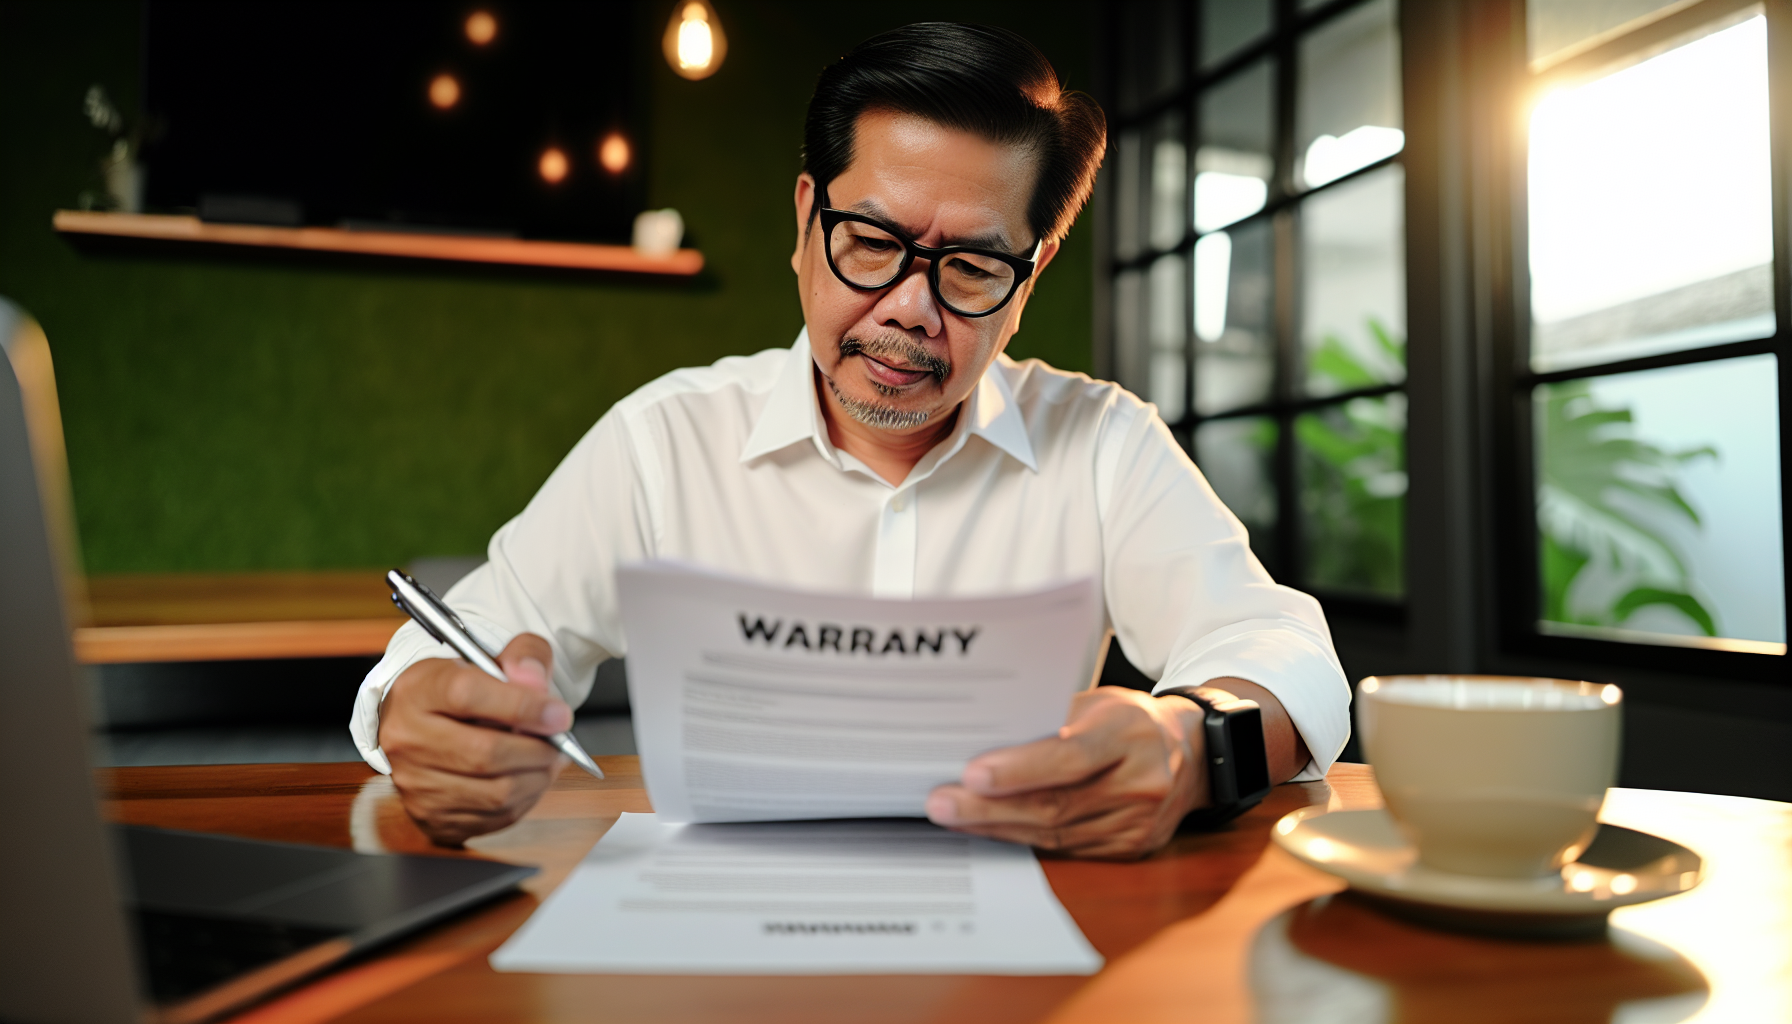 A person reviewing warranty documents for a powersports vehicle